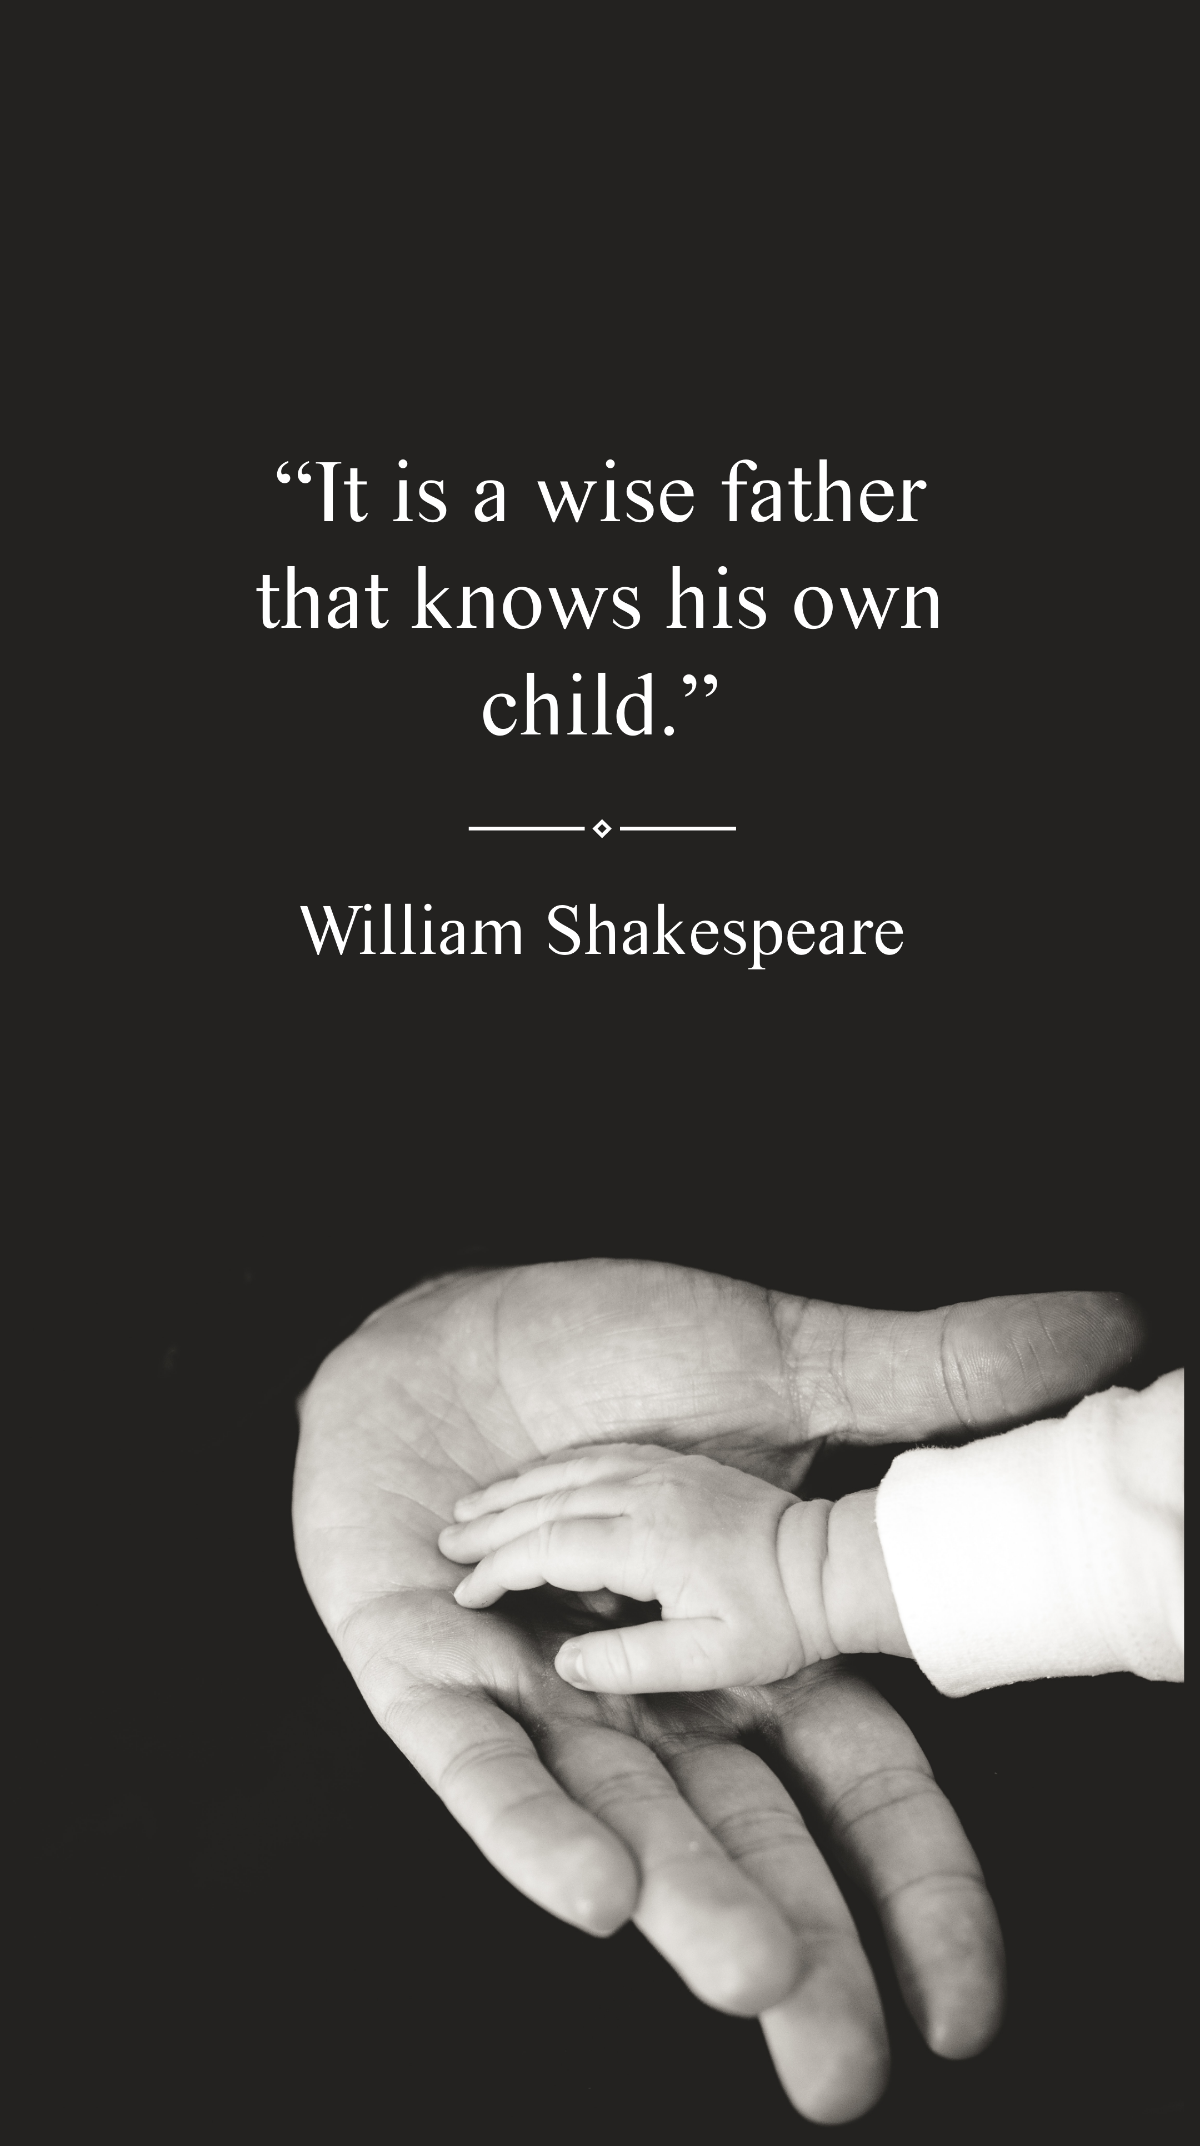 William Shakespeare - “It is a wise father that knows his own child.” Template